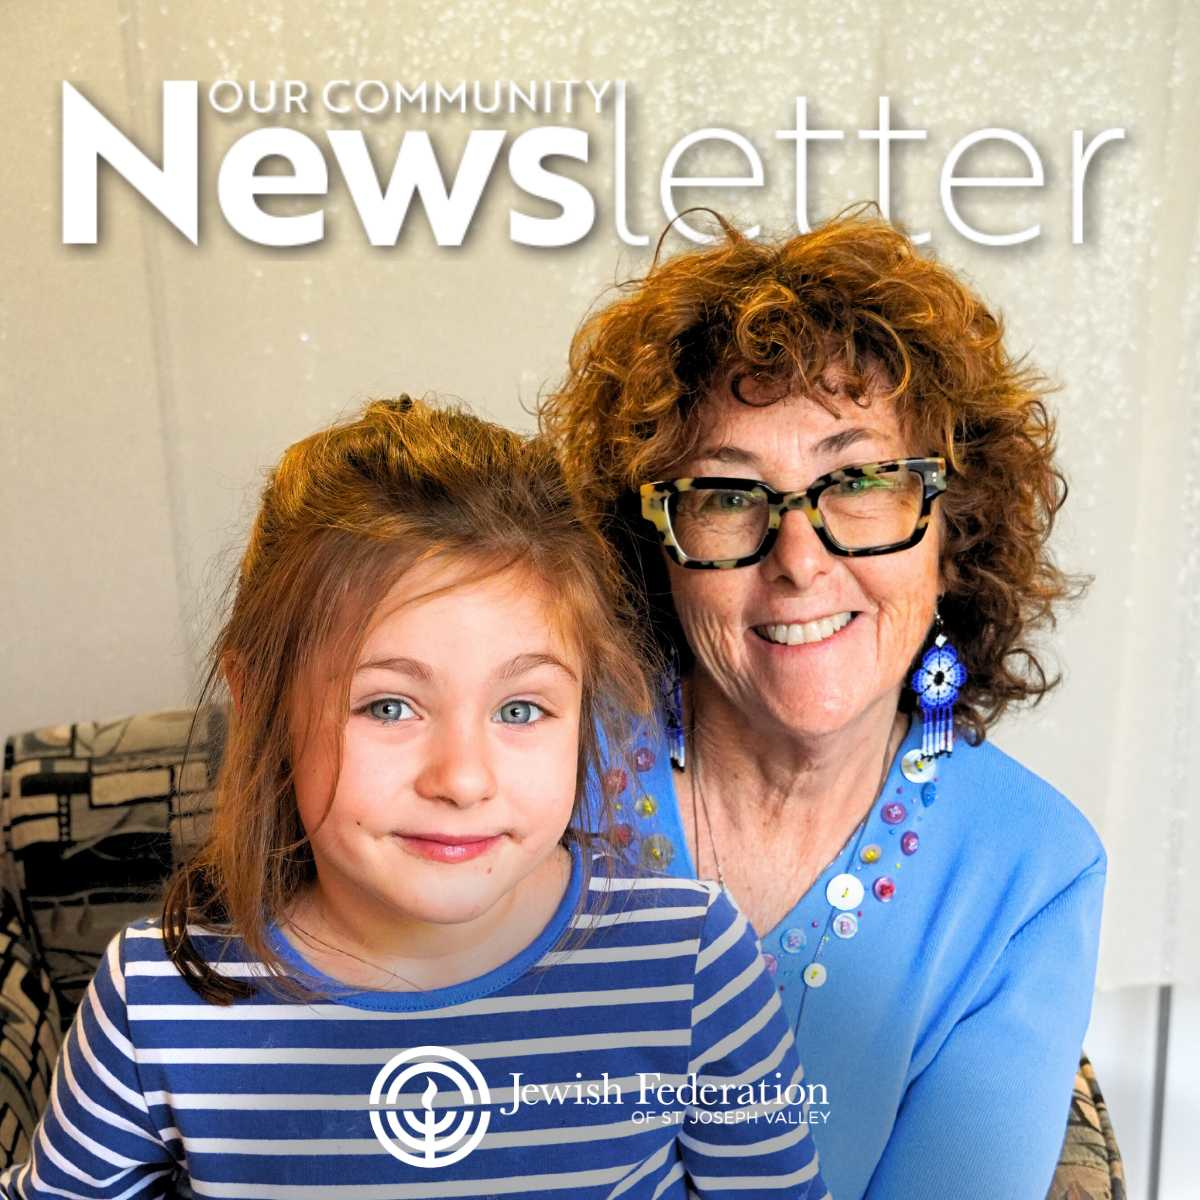 Our Community Newsletter